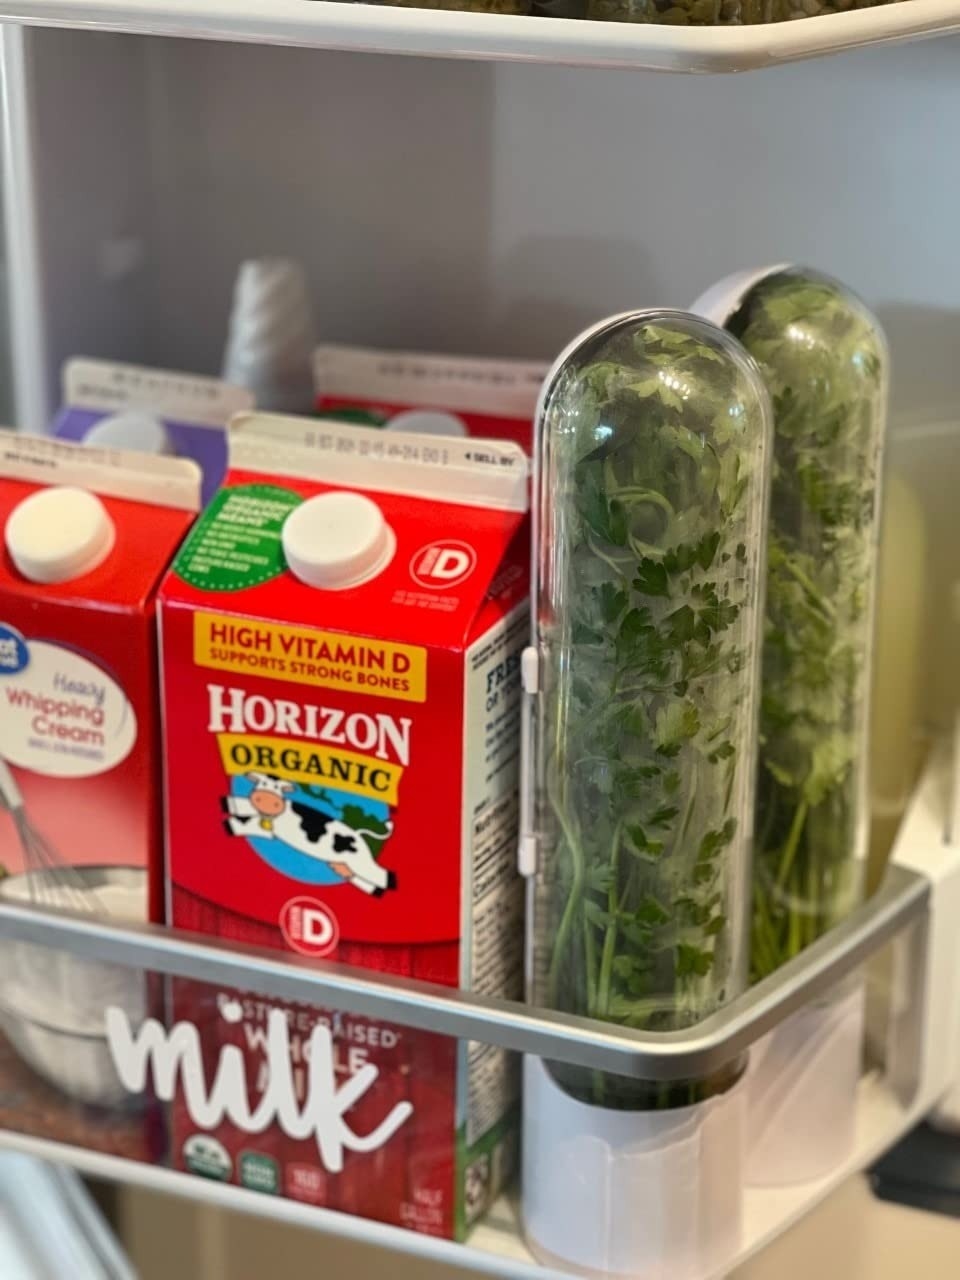 Two herb pods are shown in a fridge